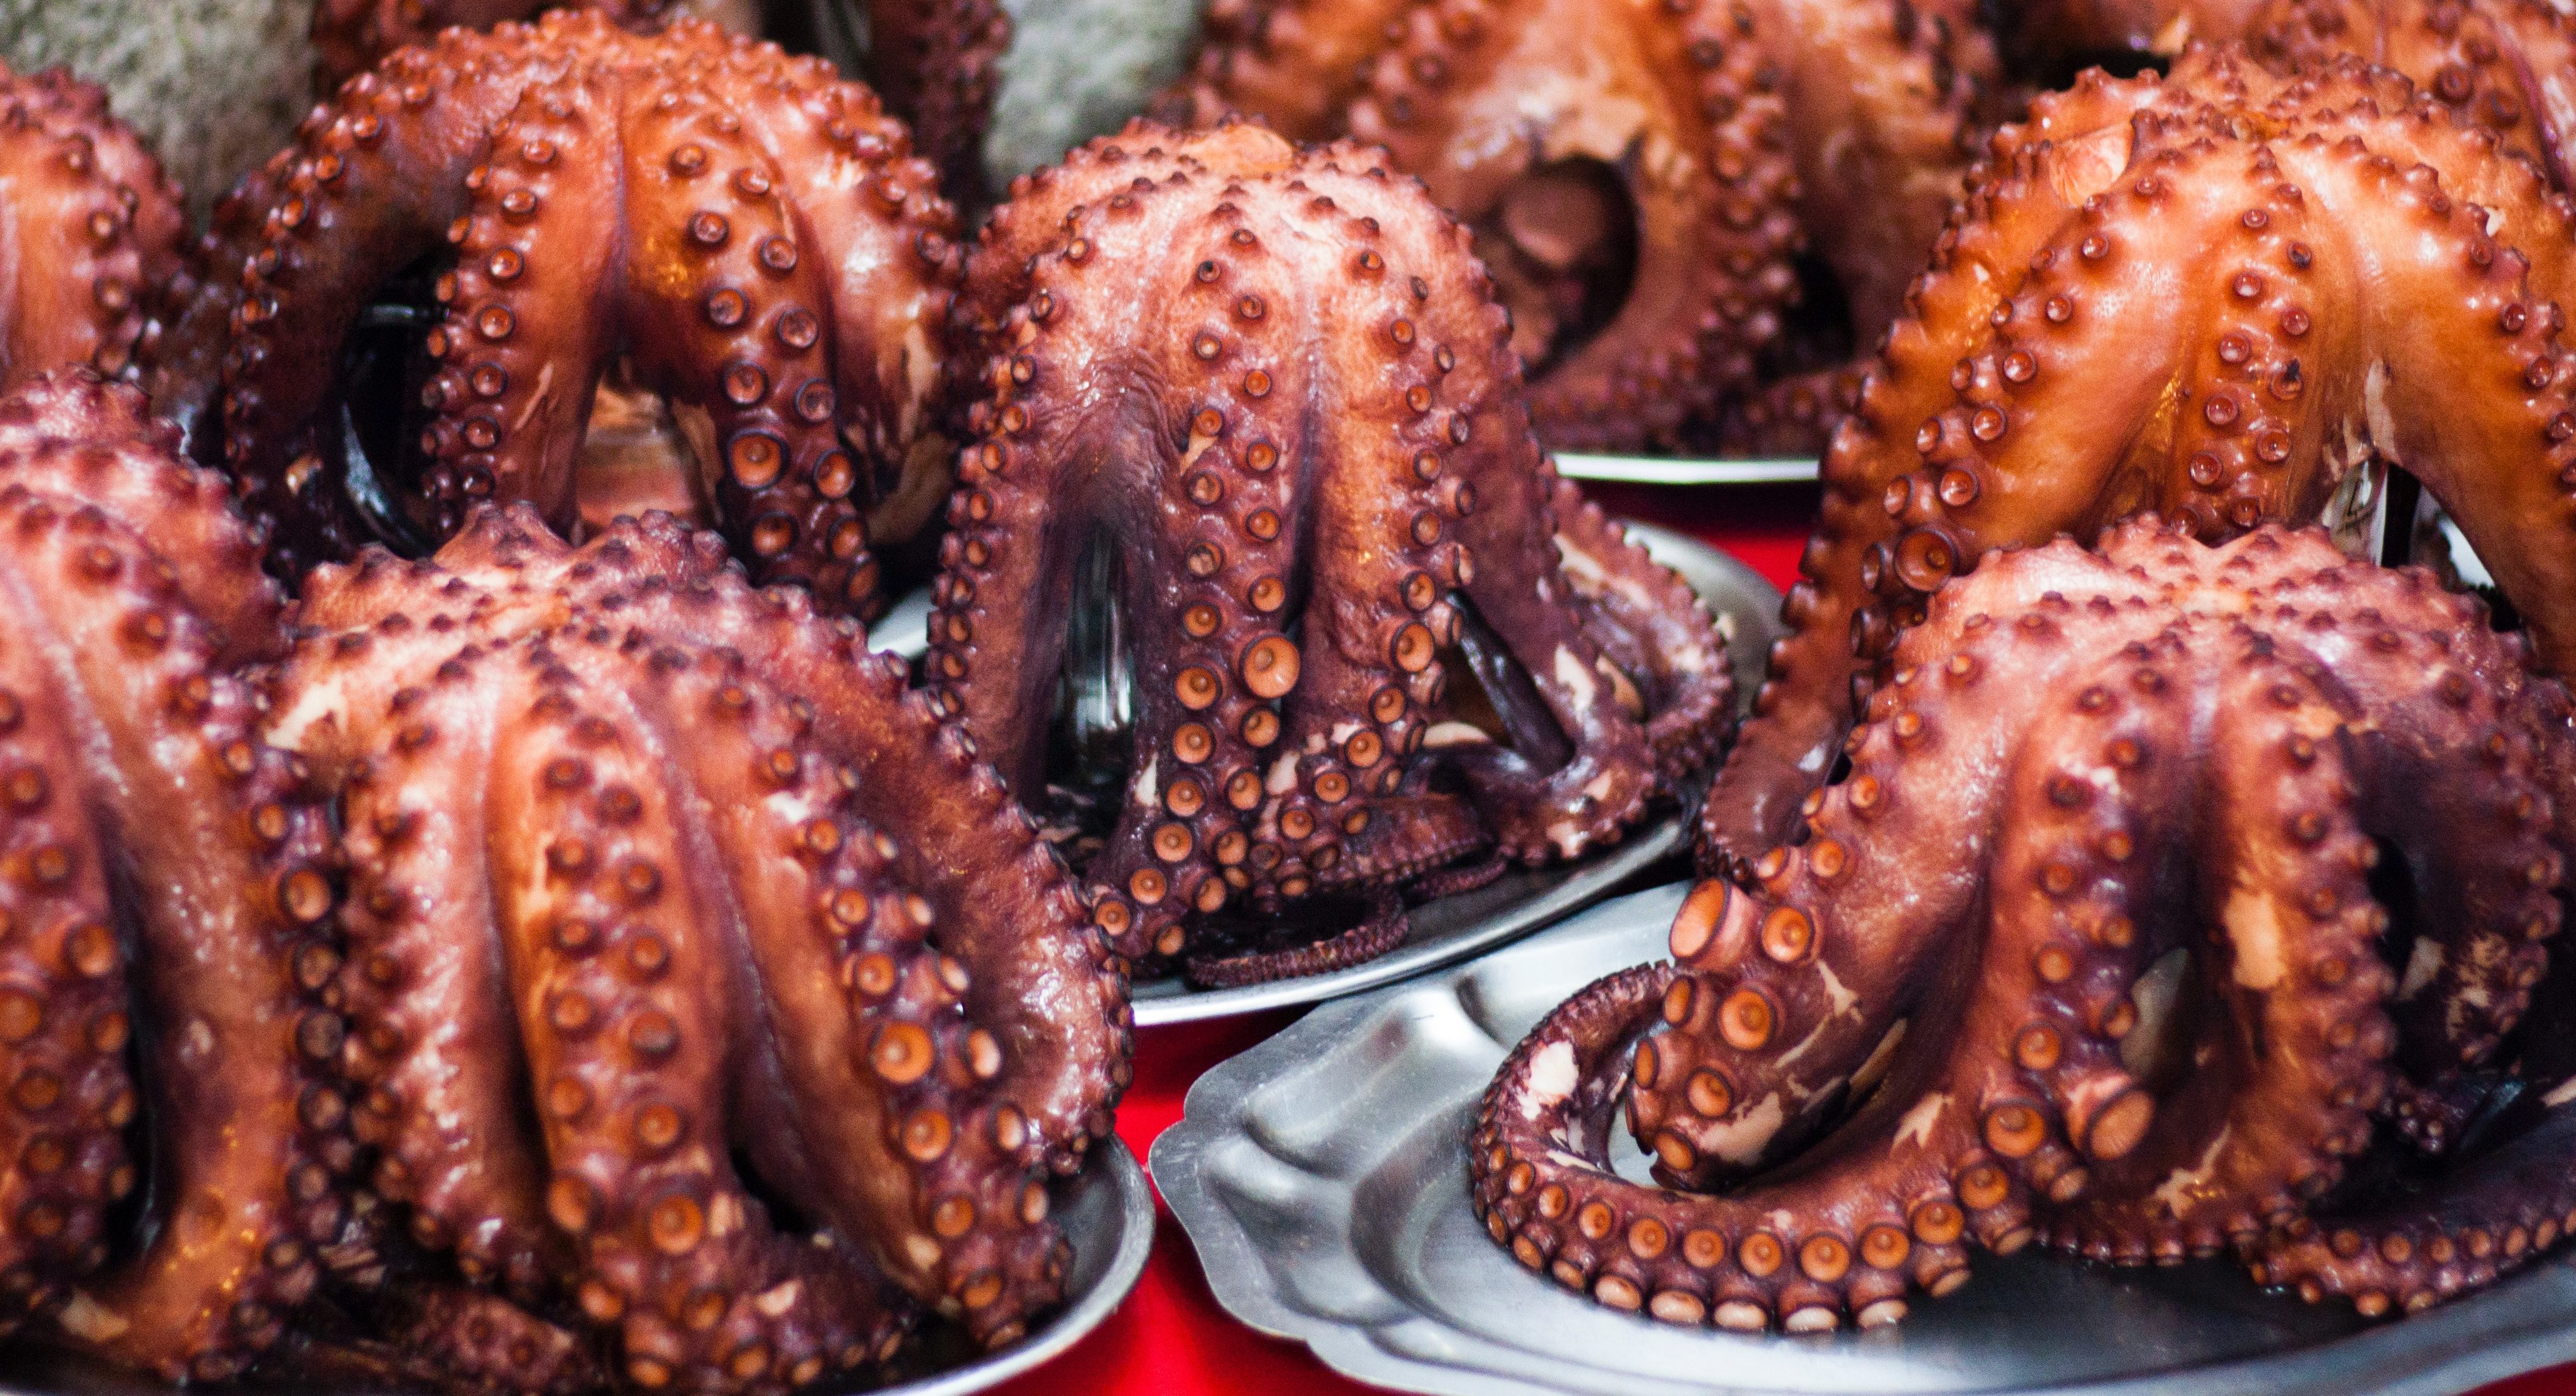 Russia seizes five Japanese octopus fishing vessels - Undercurrent